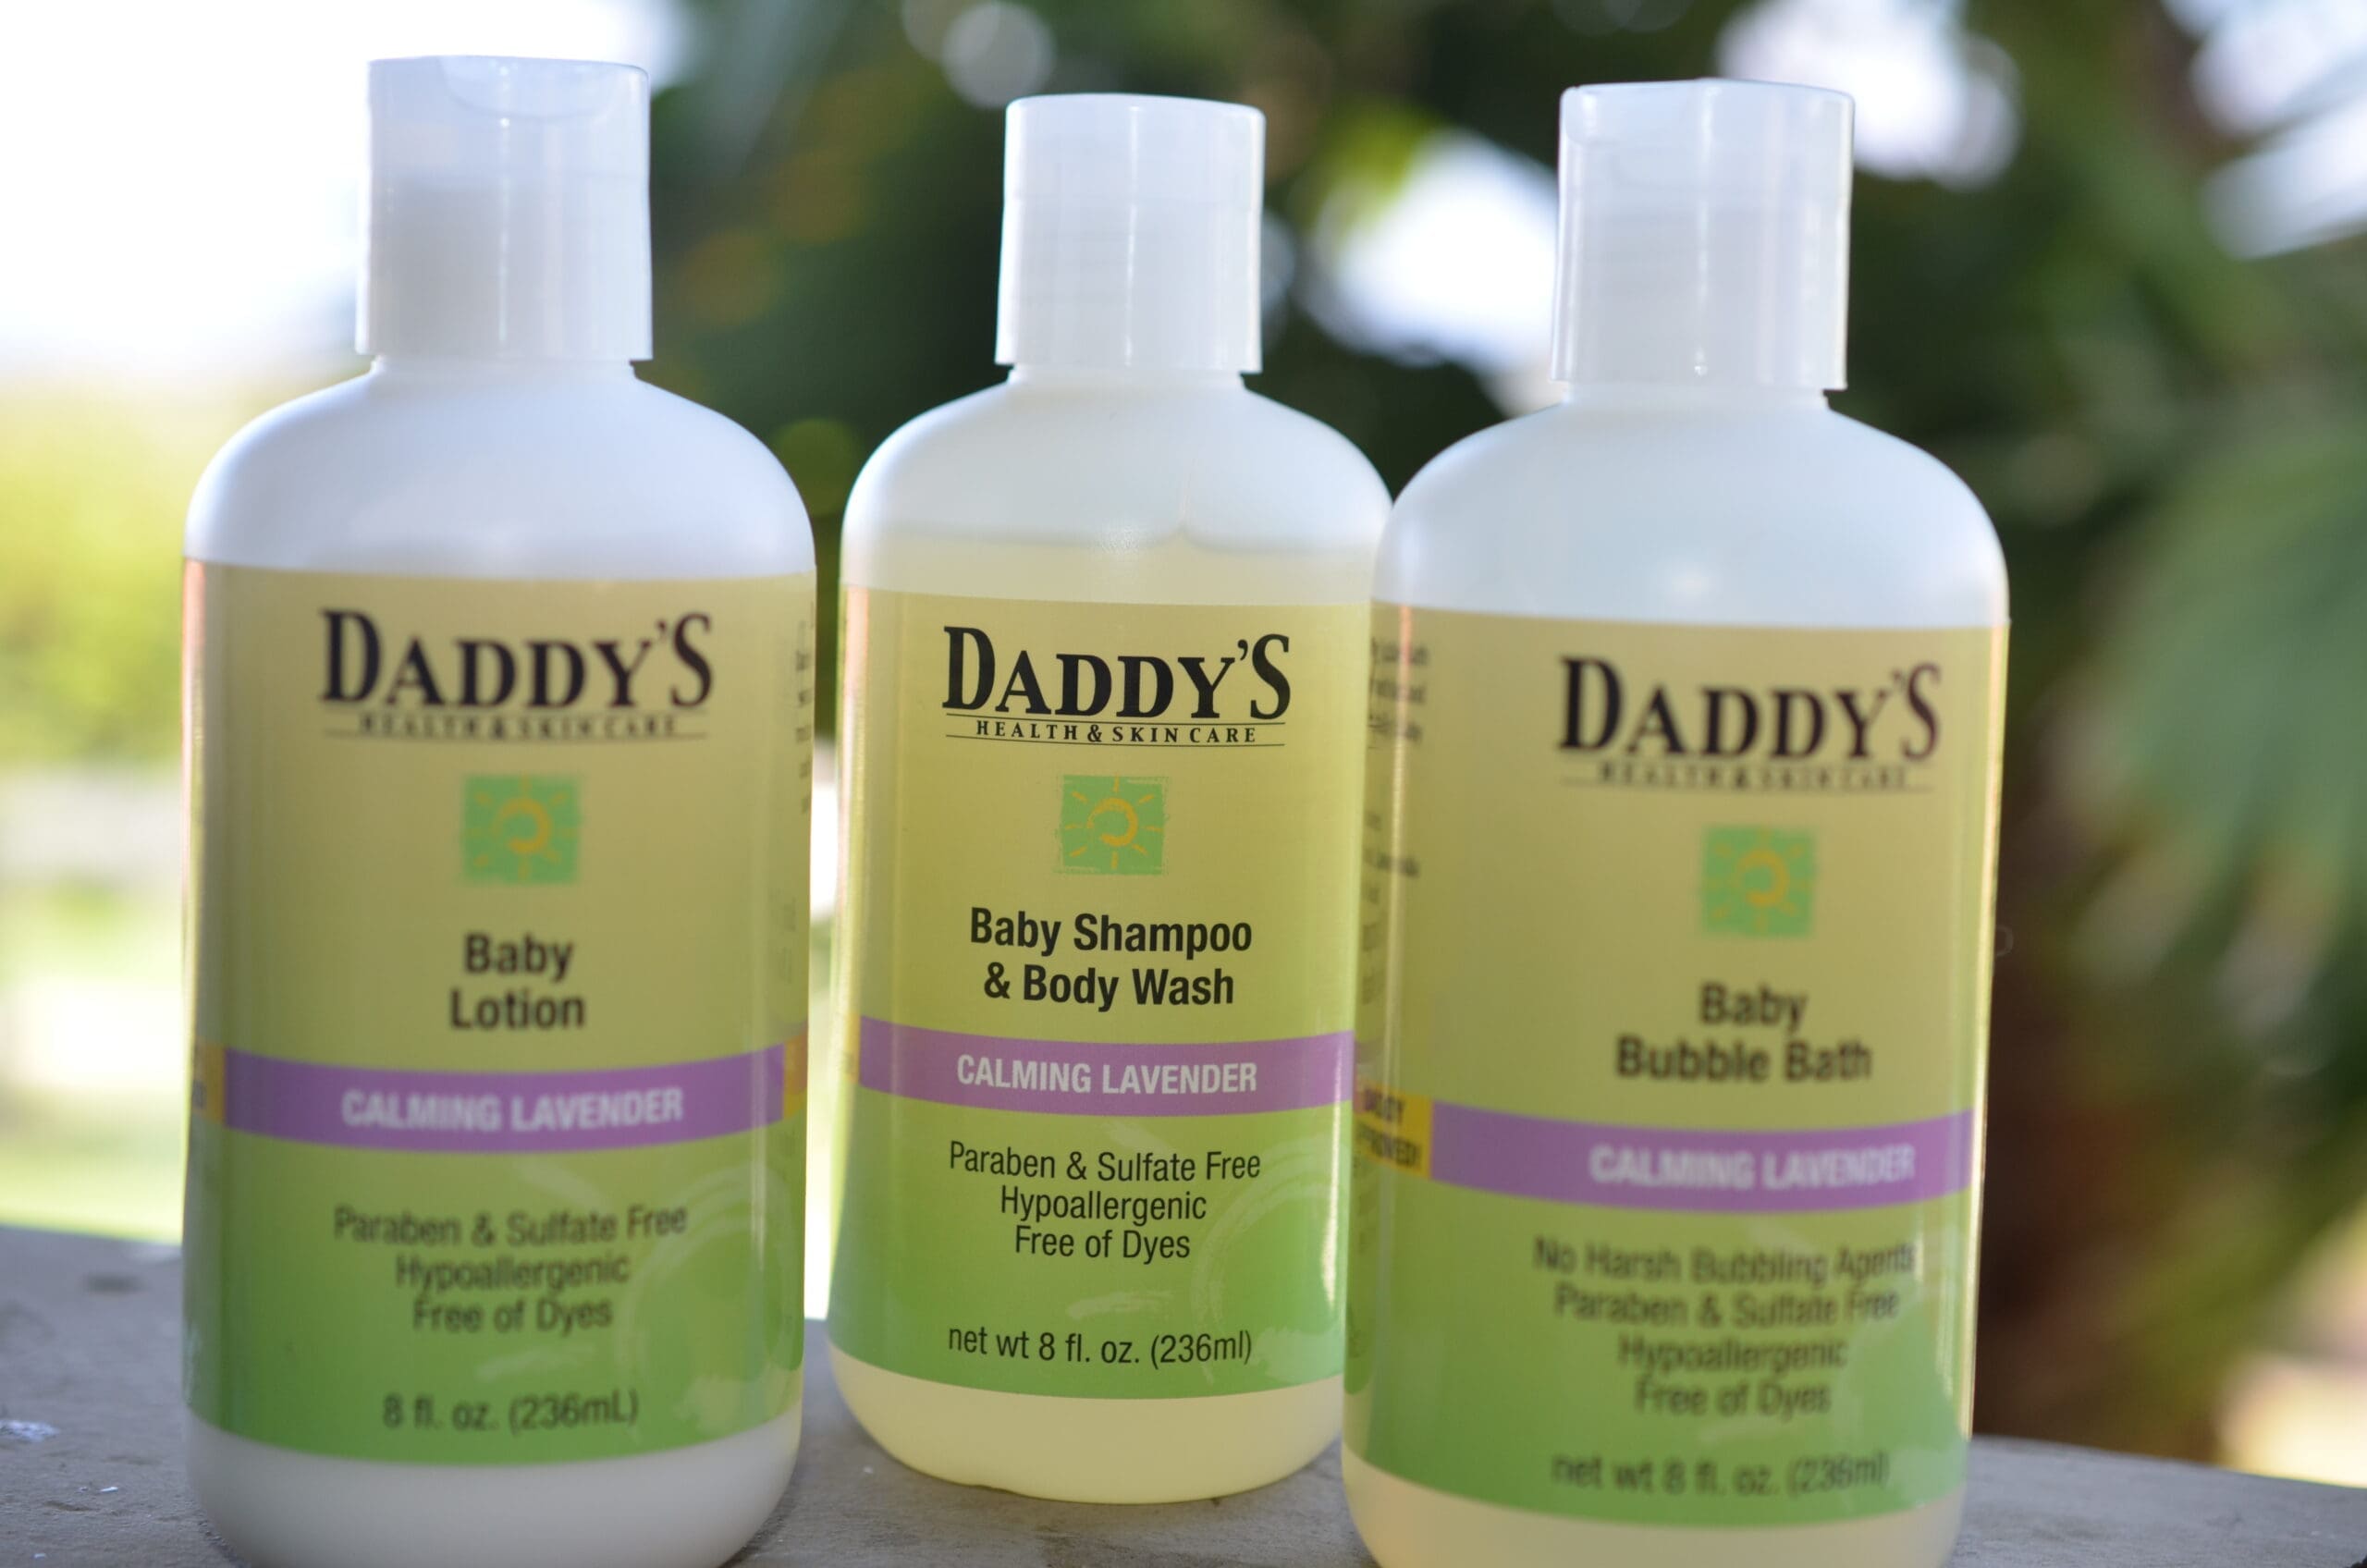 Daddy & Co New Daddy's Health & Skin Care products